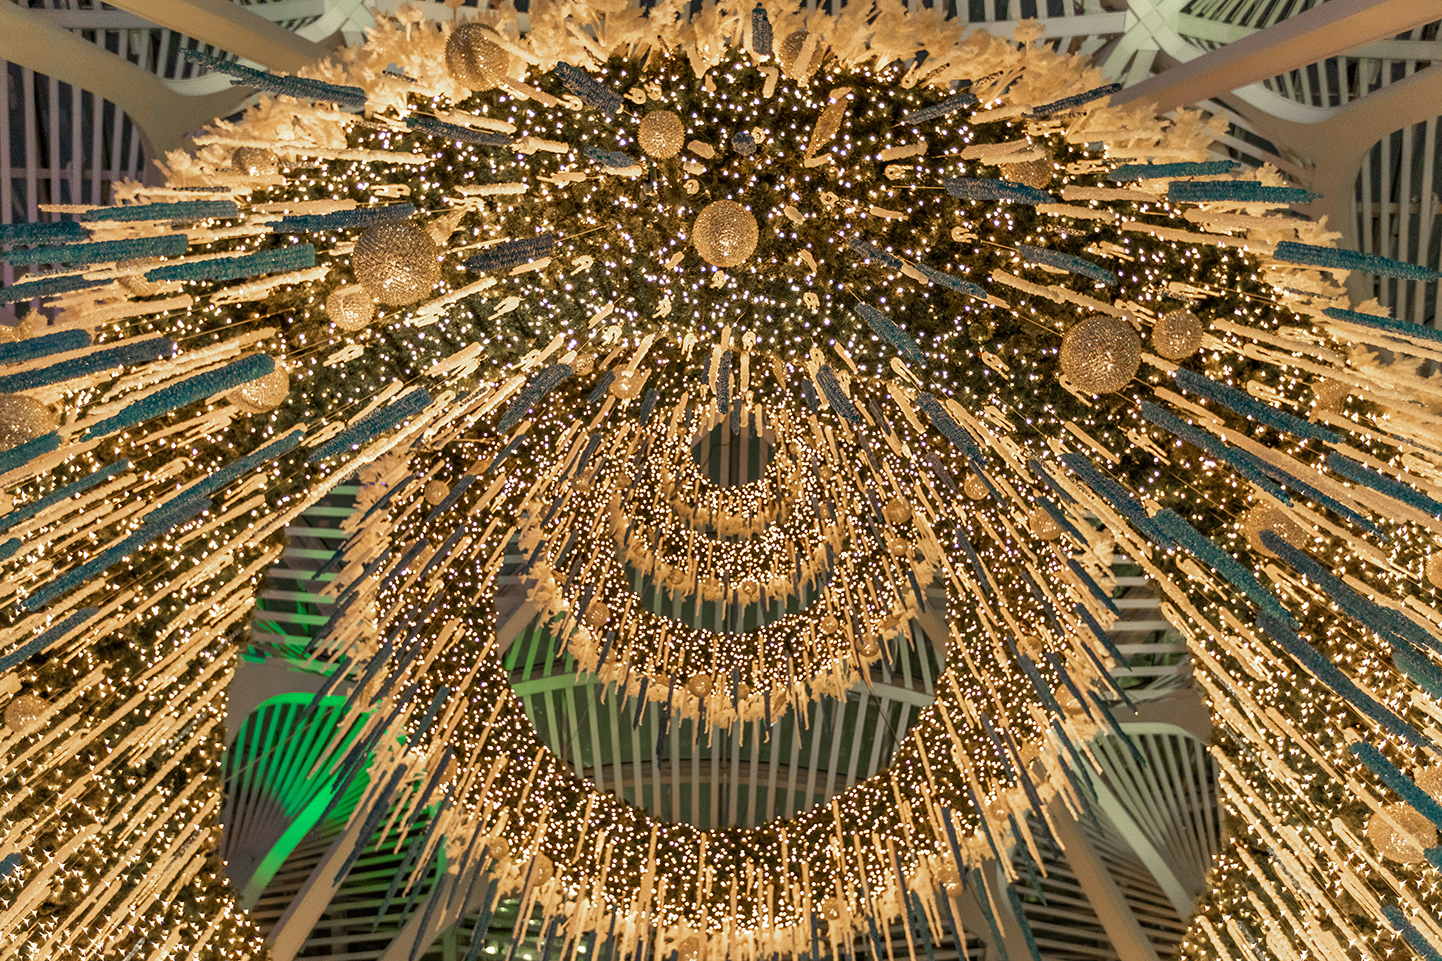 Image looking up through a tree decorated in gold and sprakling lights for the holidays